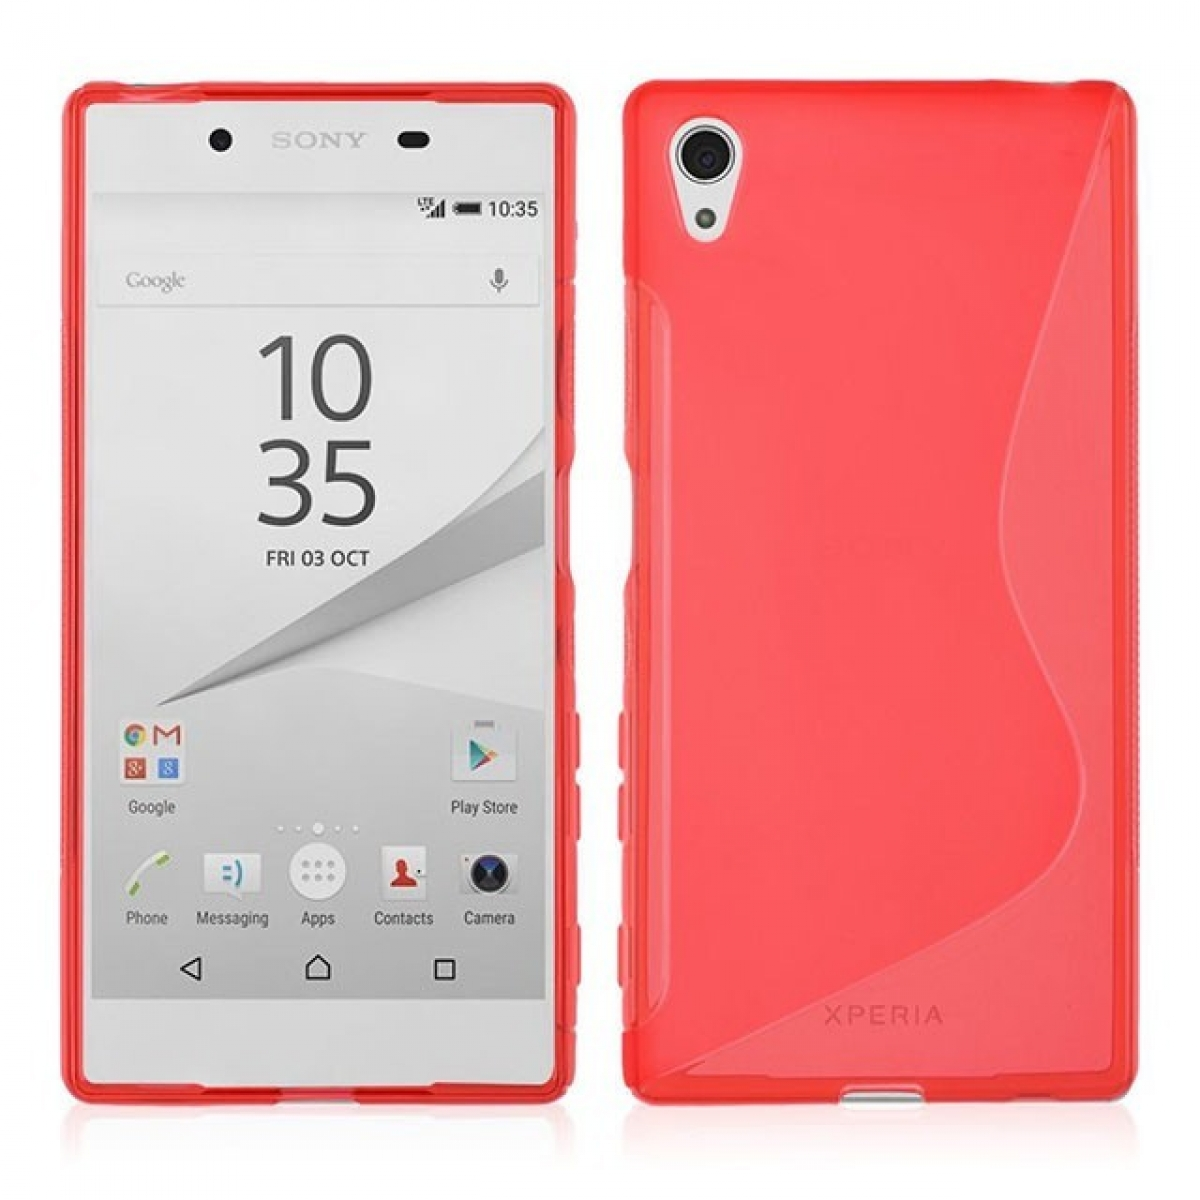 Backcover, Xperia Z5, Multicolor CASEONLINE S-Line - Sony, Rot,